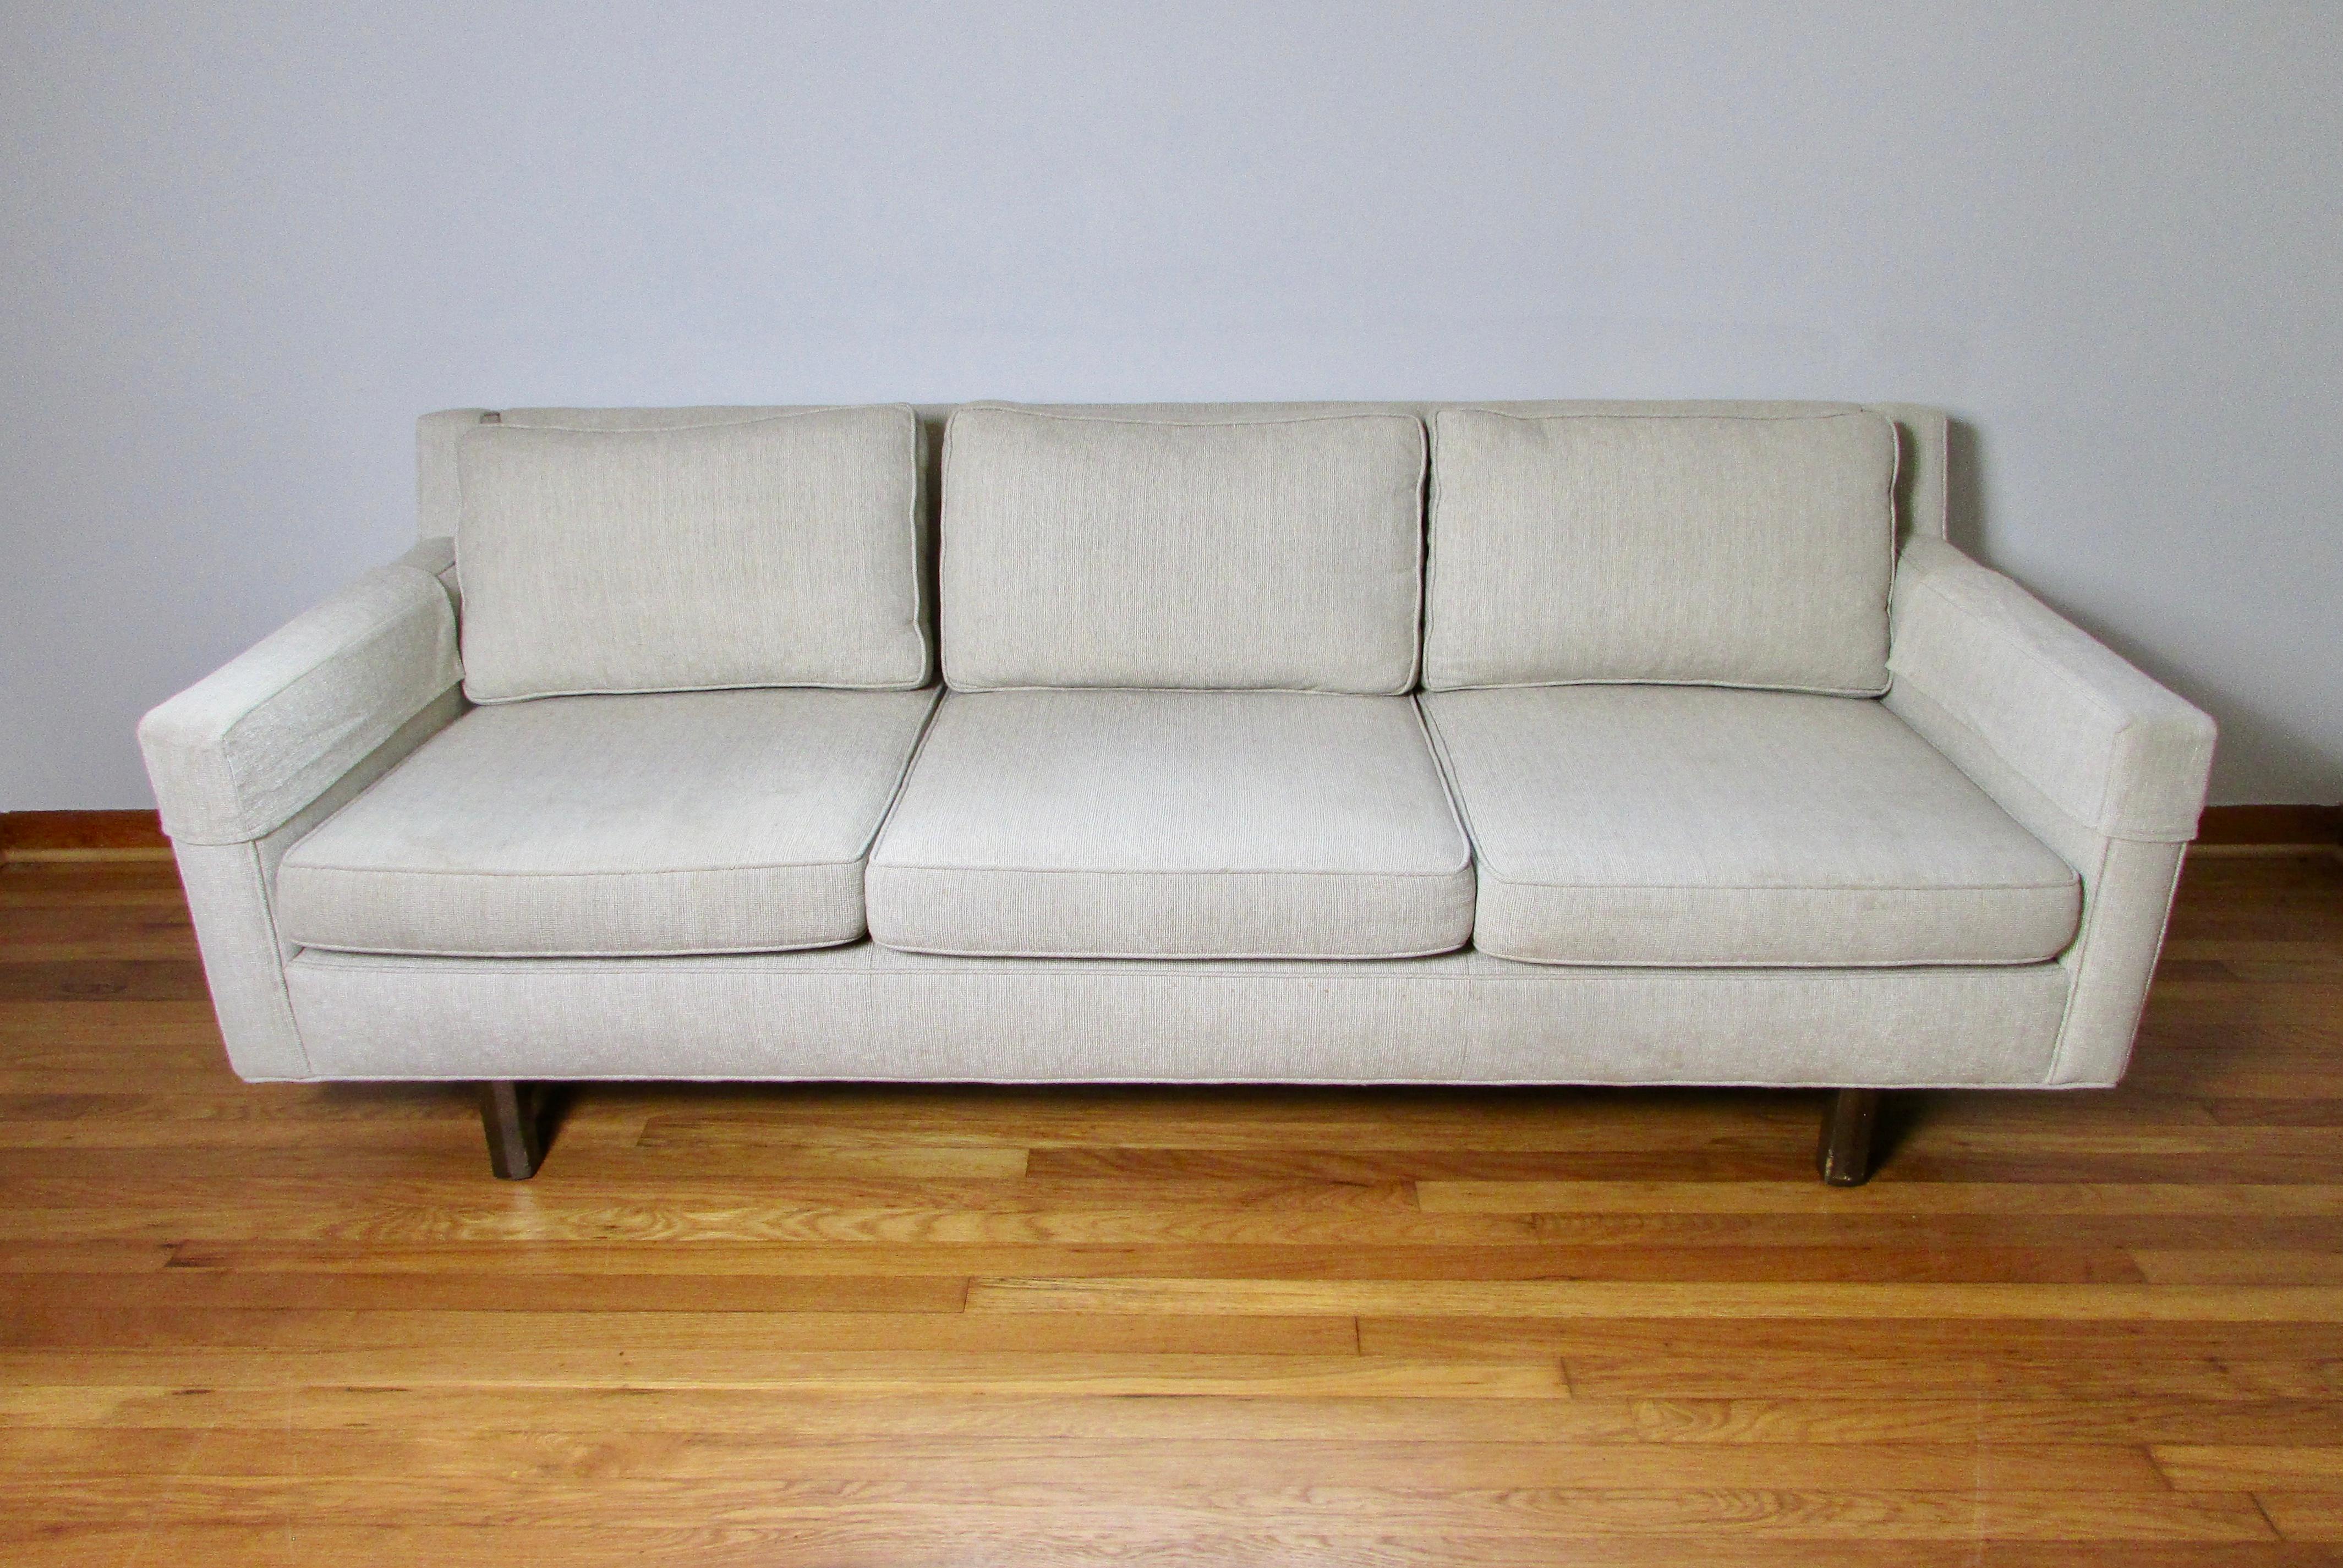 Mid-Century three seat sofa in a sandy beige and white woven upholstery similar to a boucle. Three down-filled back cushions and three foam seat cushions make this a comfortable and good looking sofa. Acquired from a  interior designer's mid century